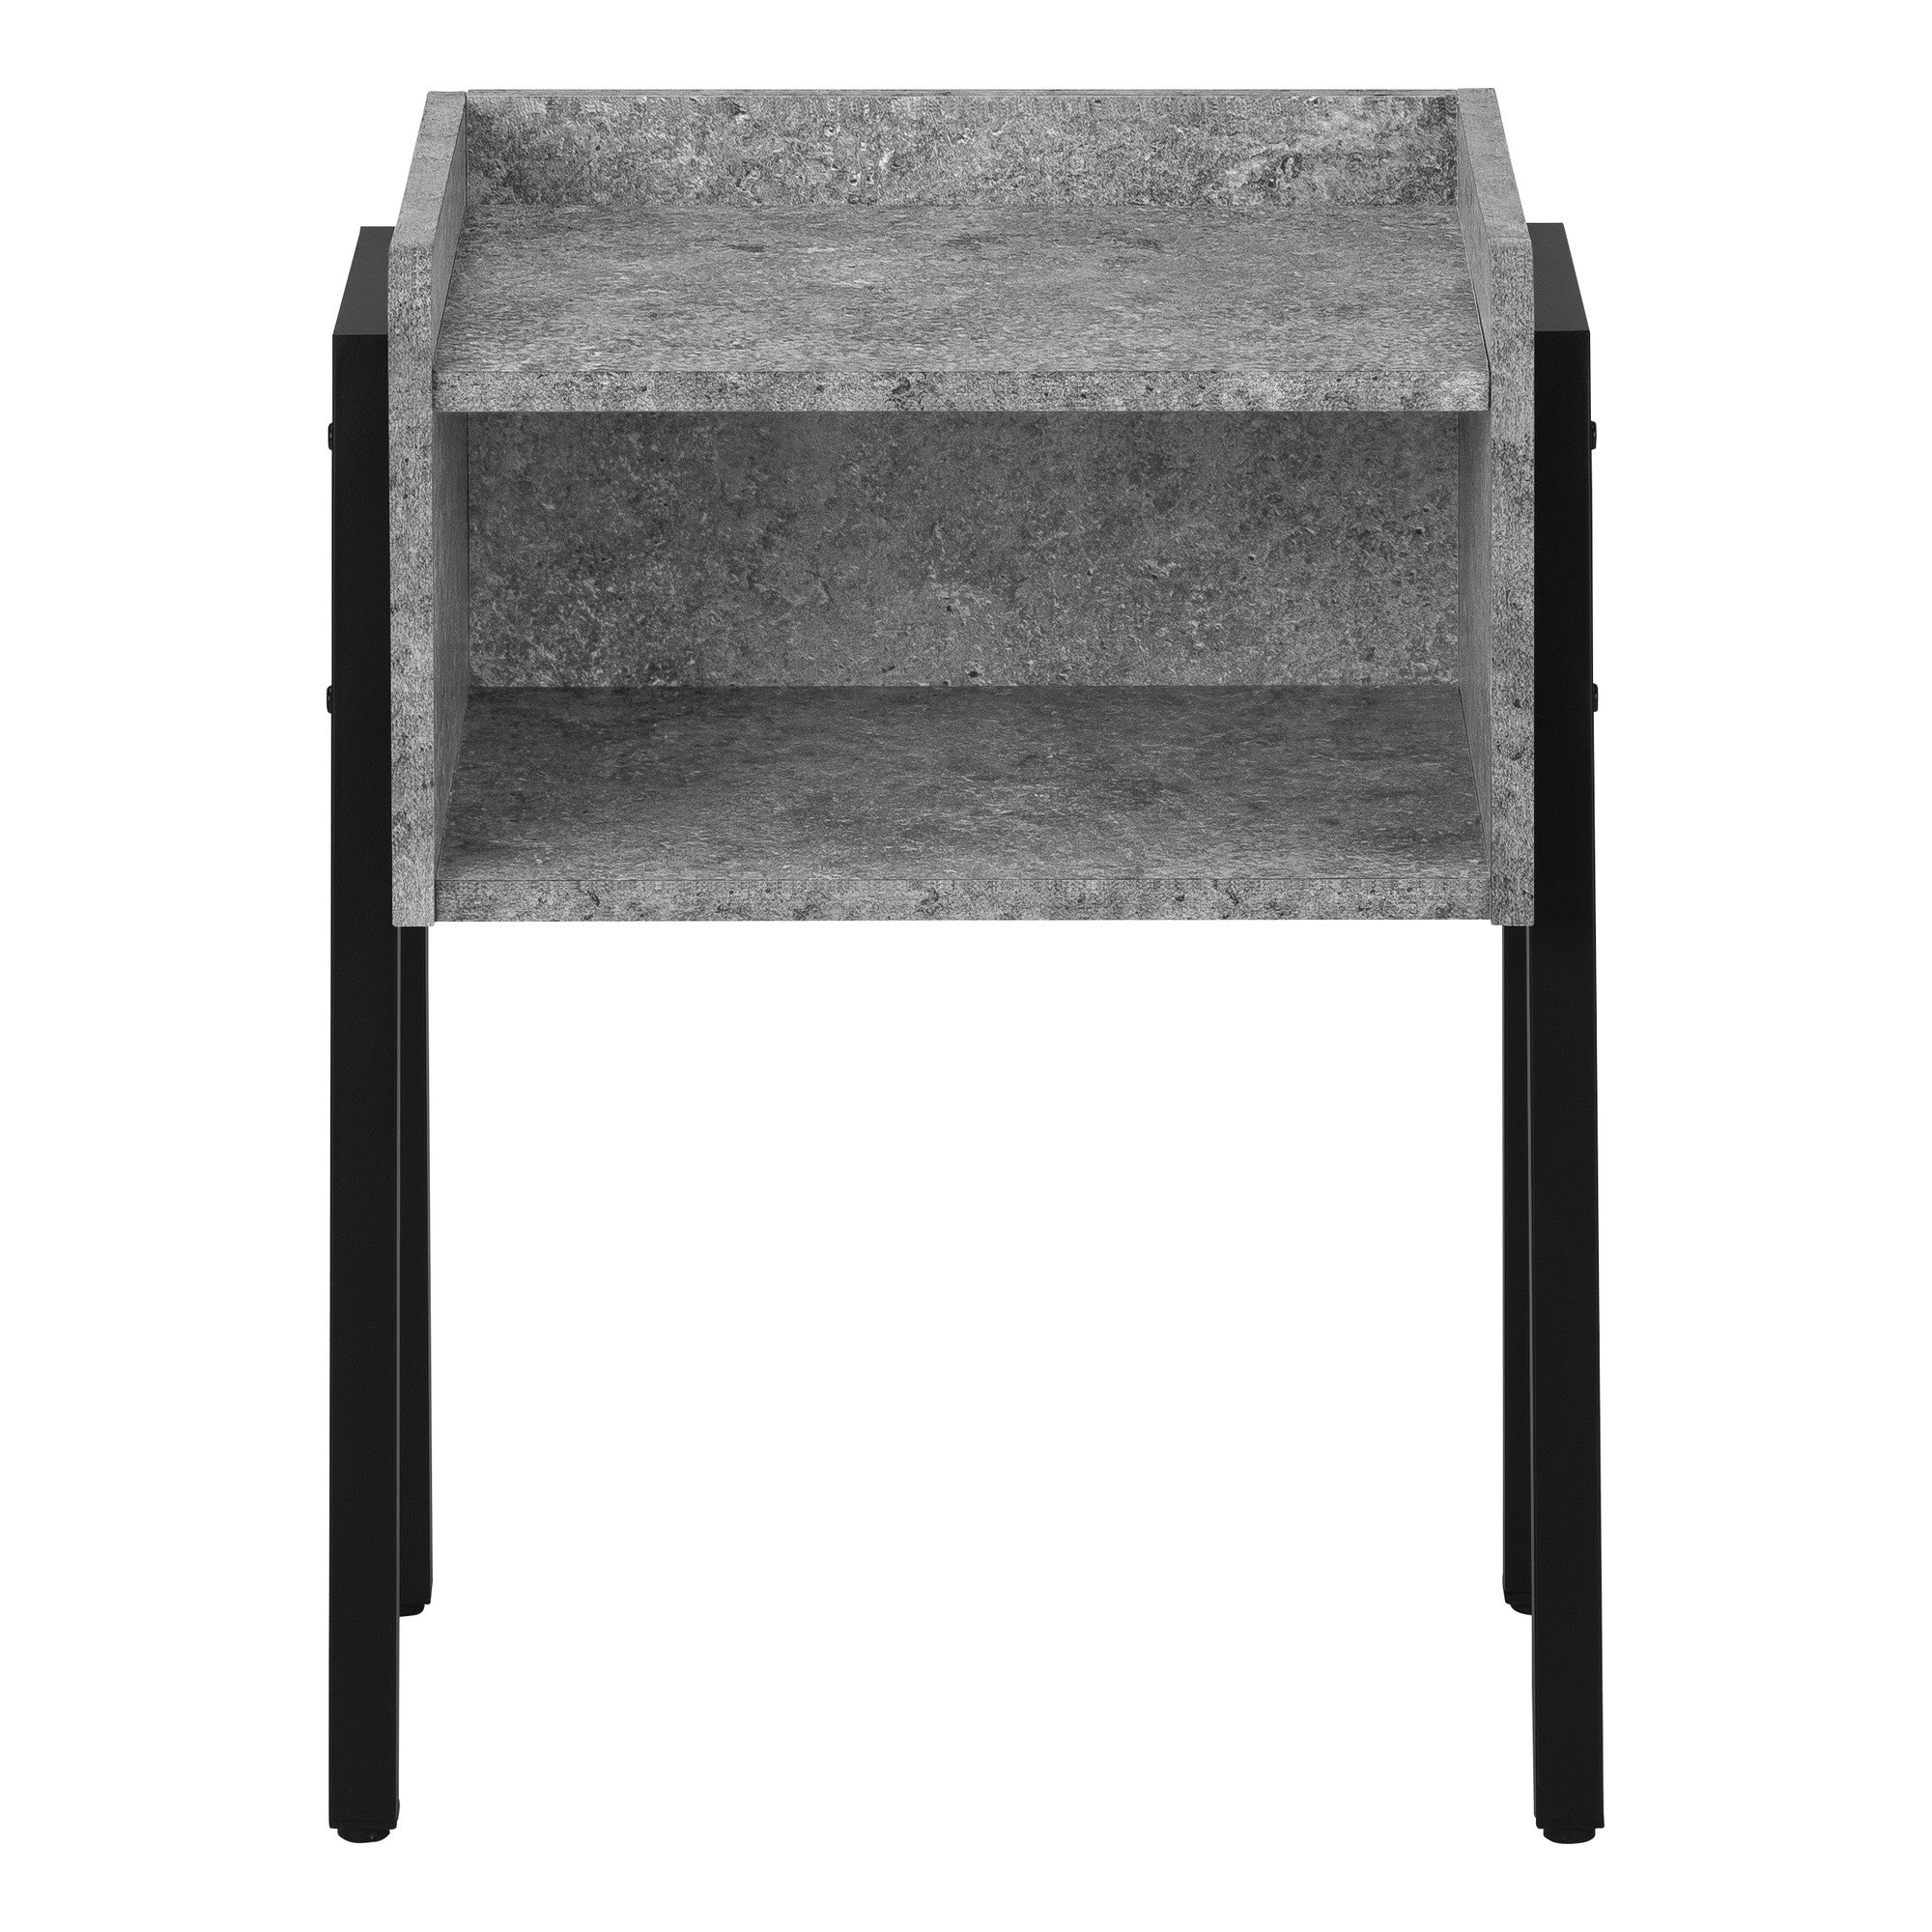 23" Black And Grey Faux Stone End Table With Shelf